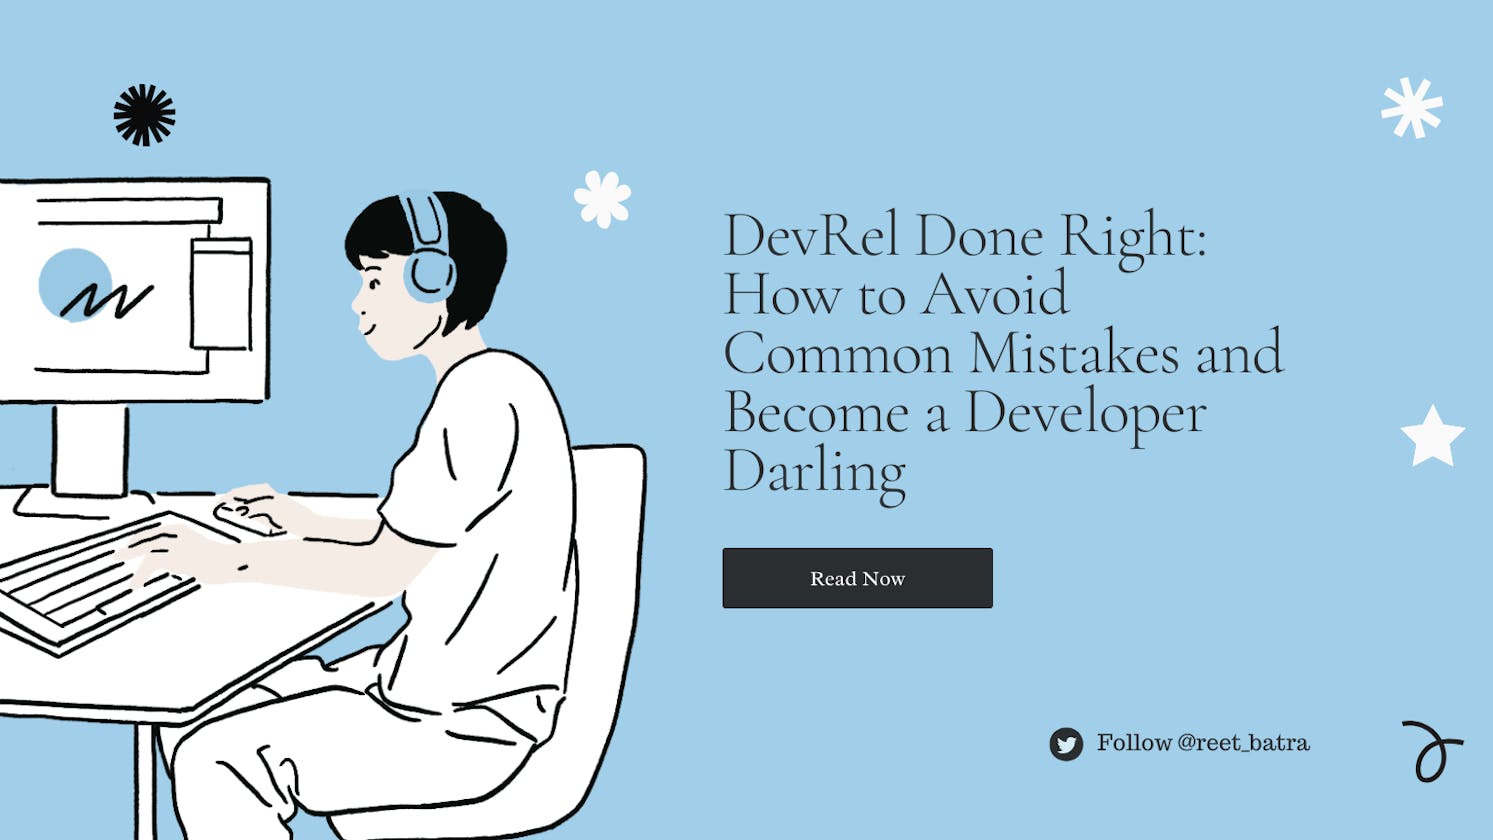 DevRel Done Right: How to Avoid Common Mistakes and Become a Developer Darling